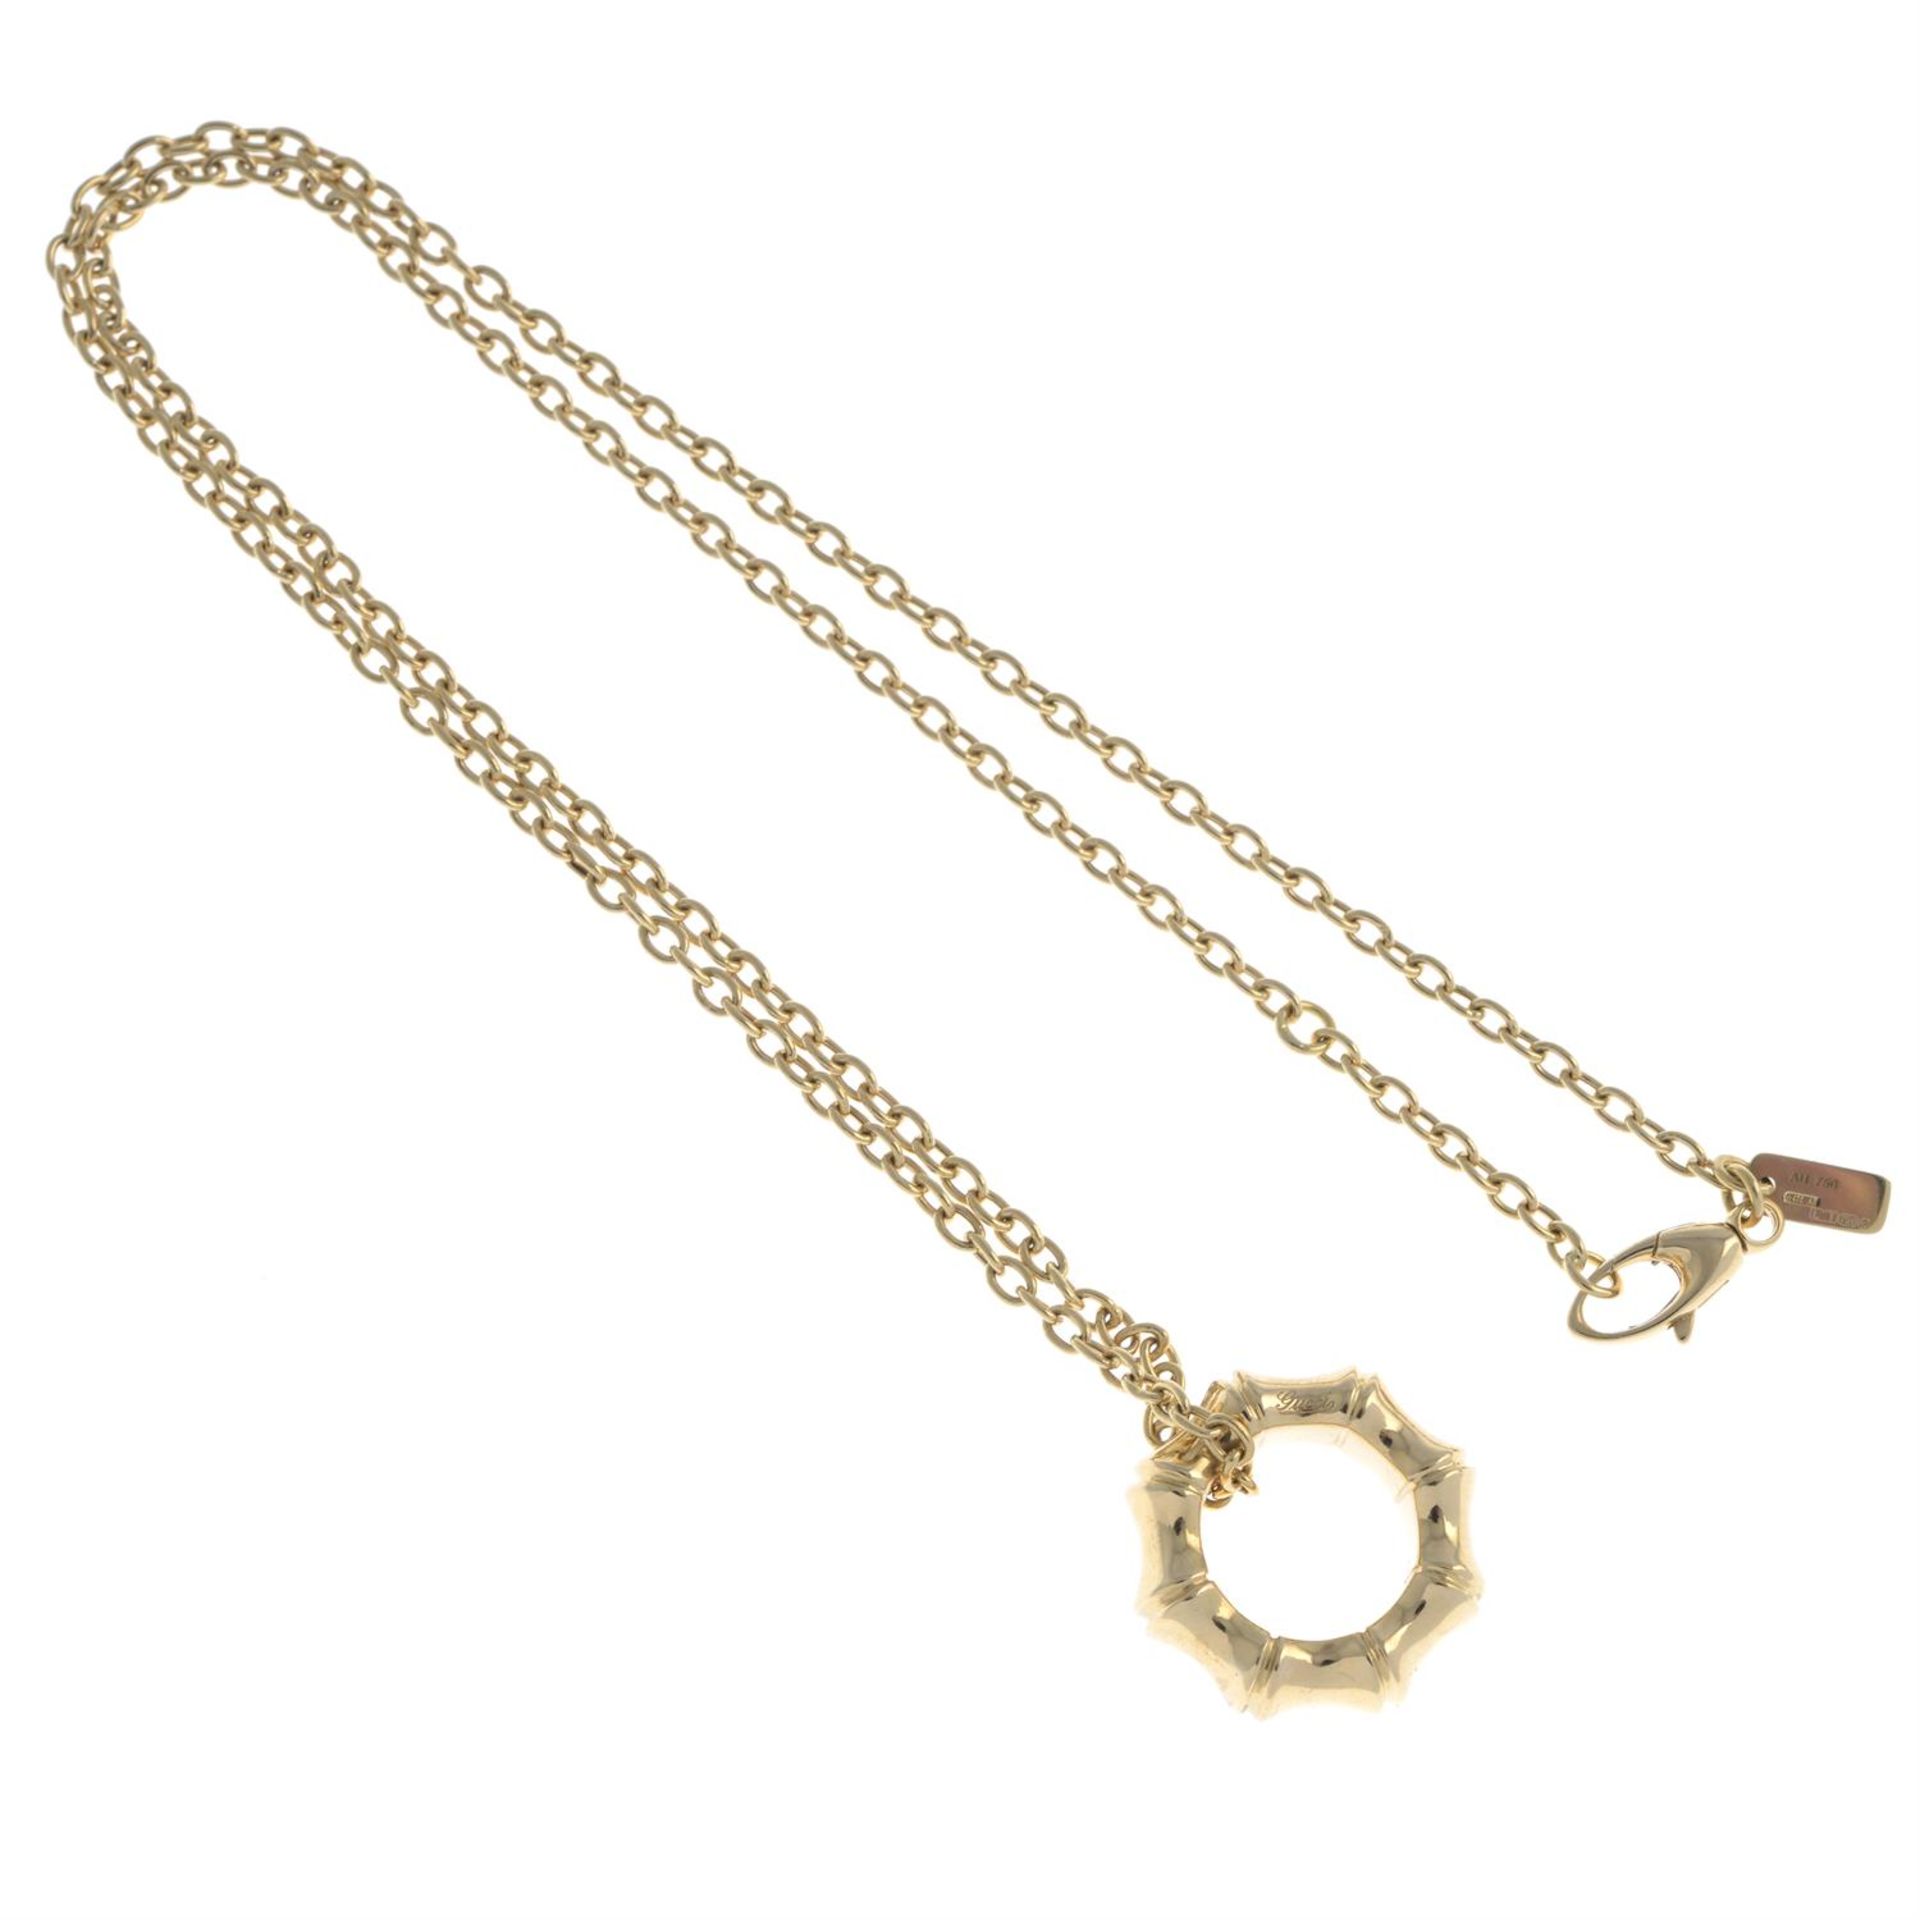 18ct gold bamboo pendant, on chain, by Gucci - Image 3 of 4